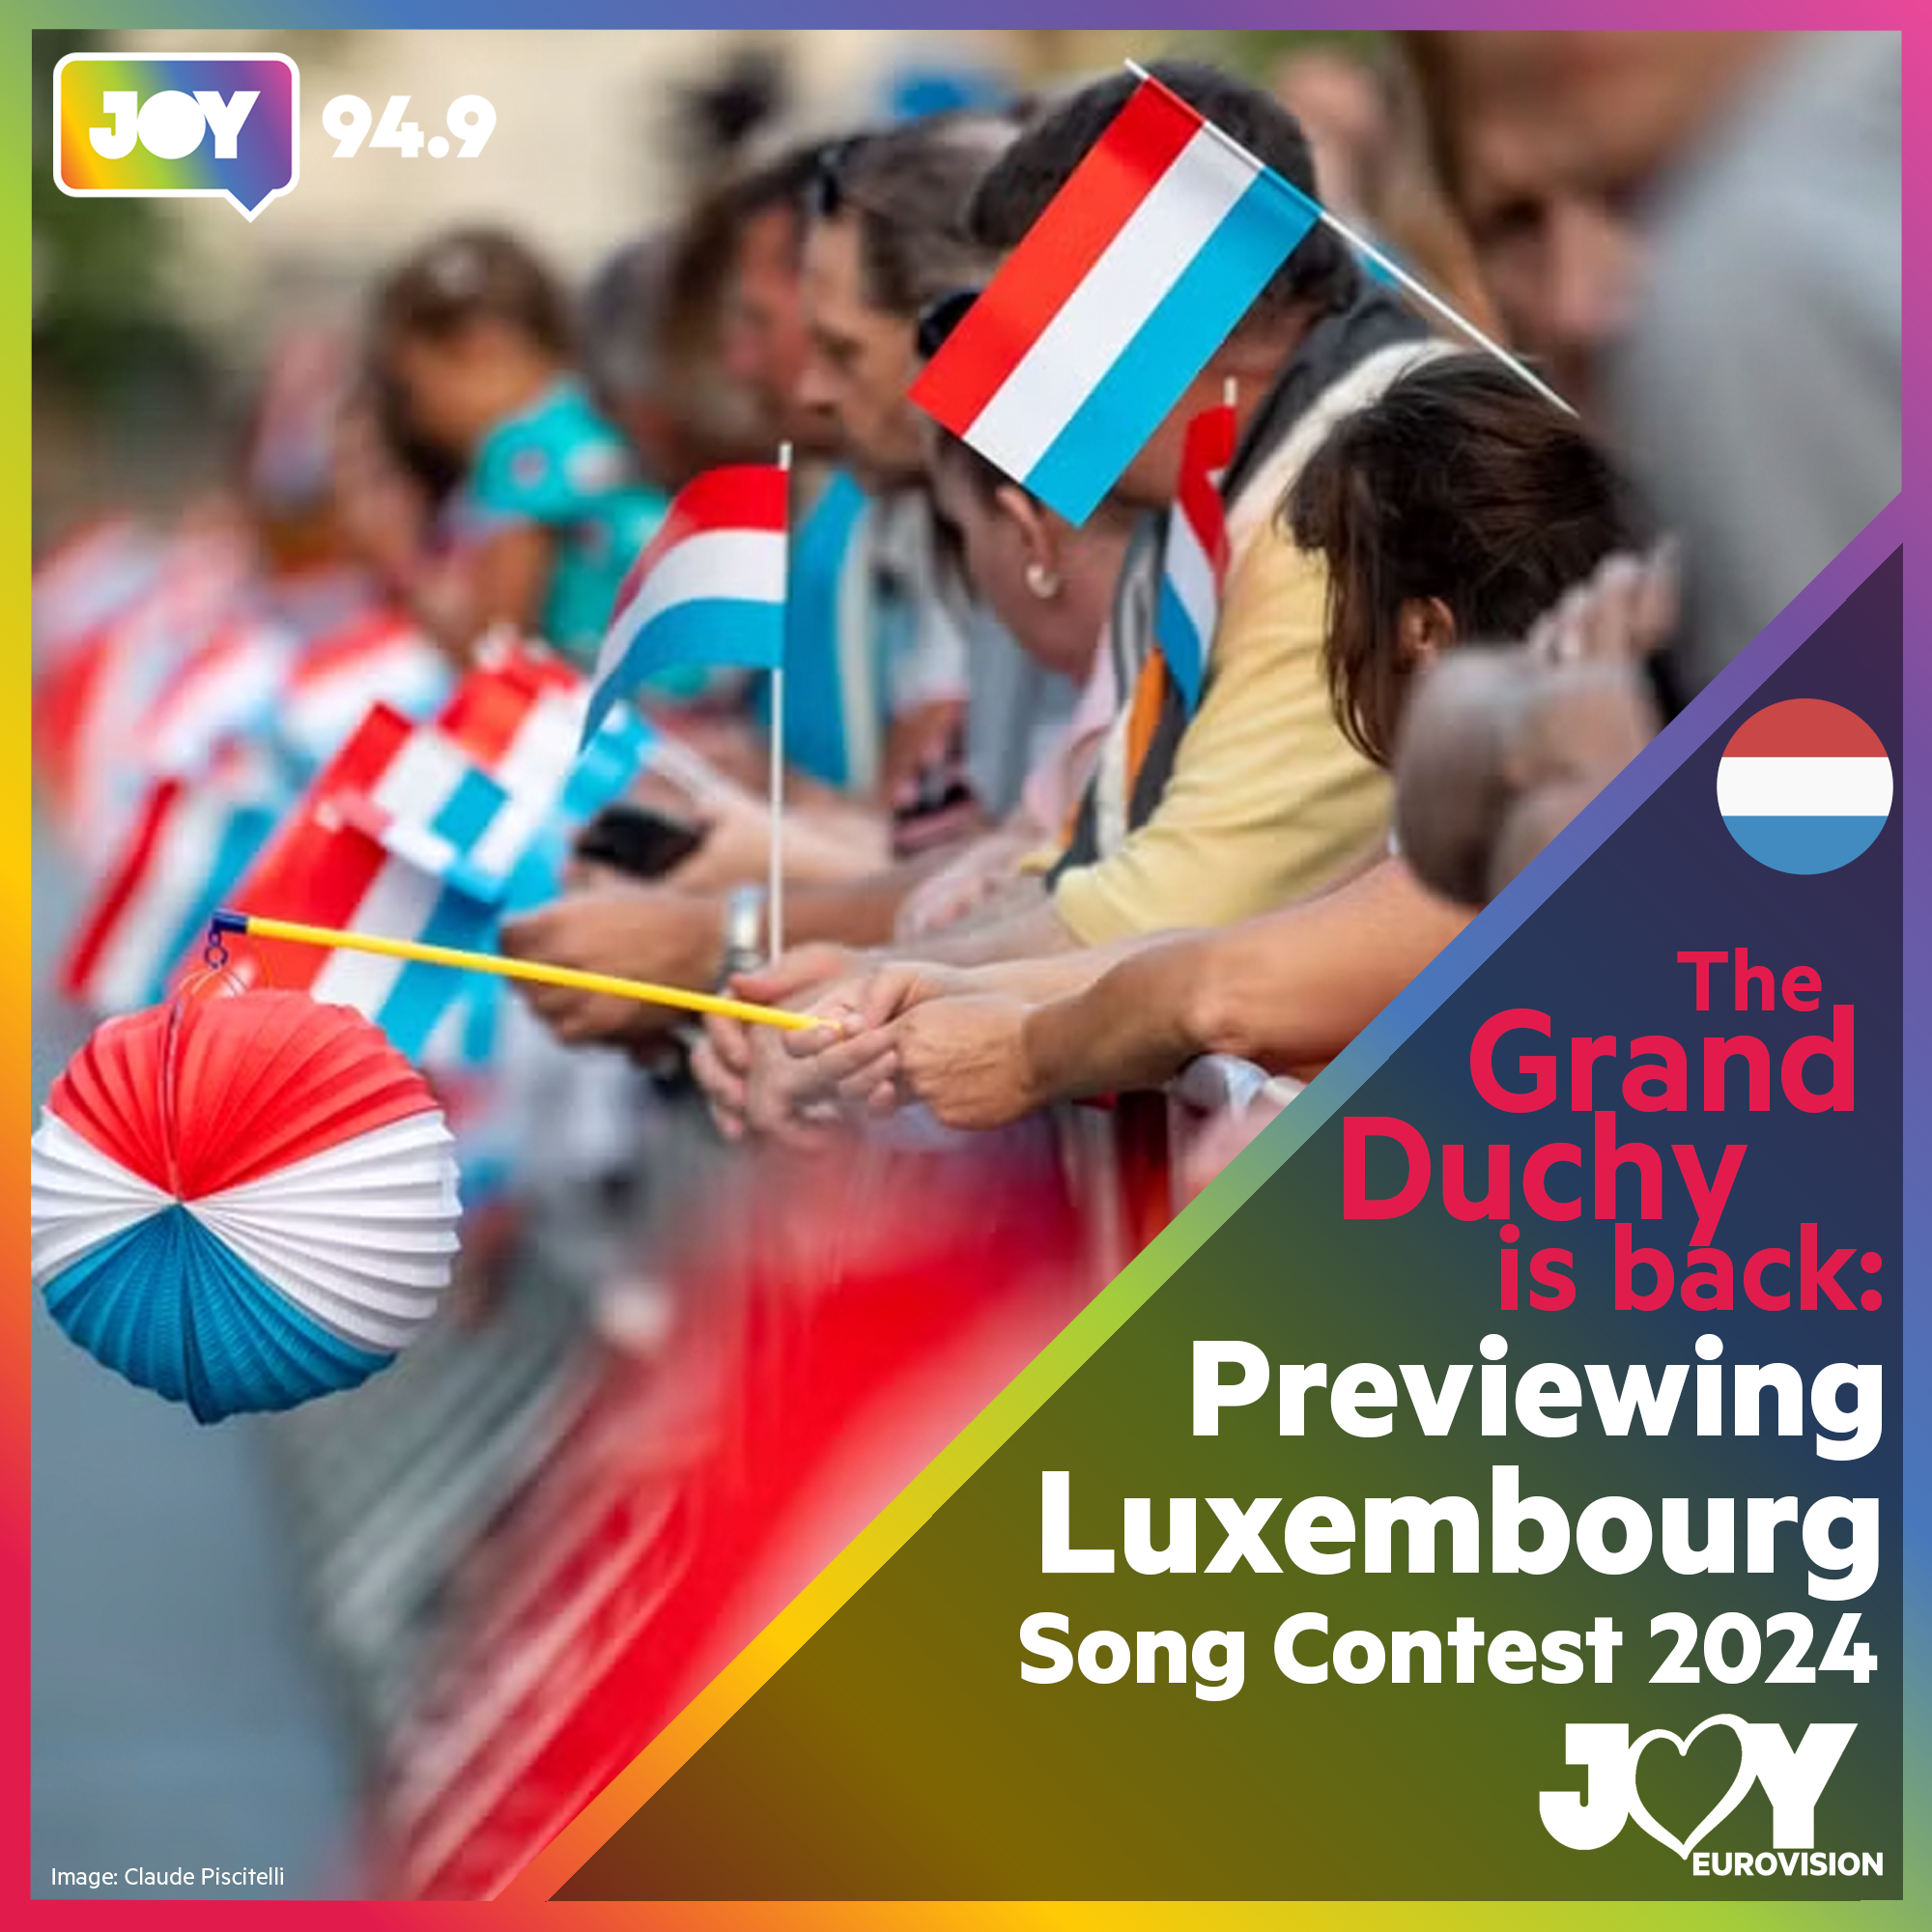 🇱🇺 The Grand Duchy is back: Previewing Luxembourg Song Contest 2024